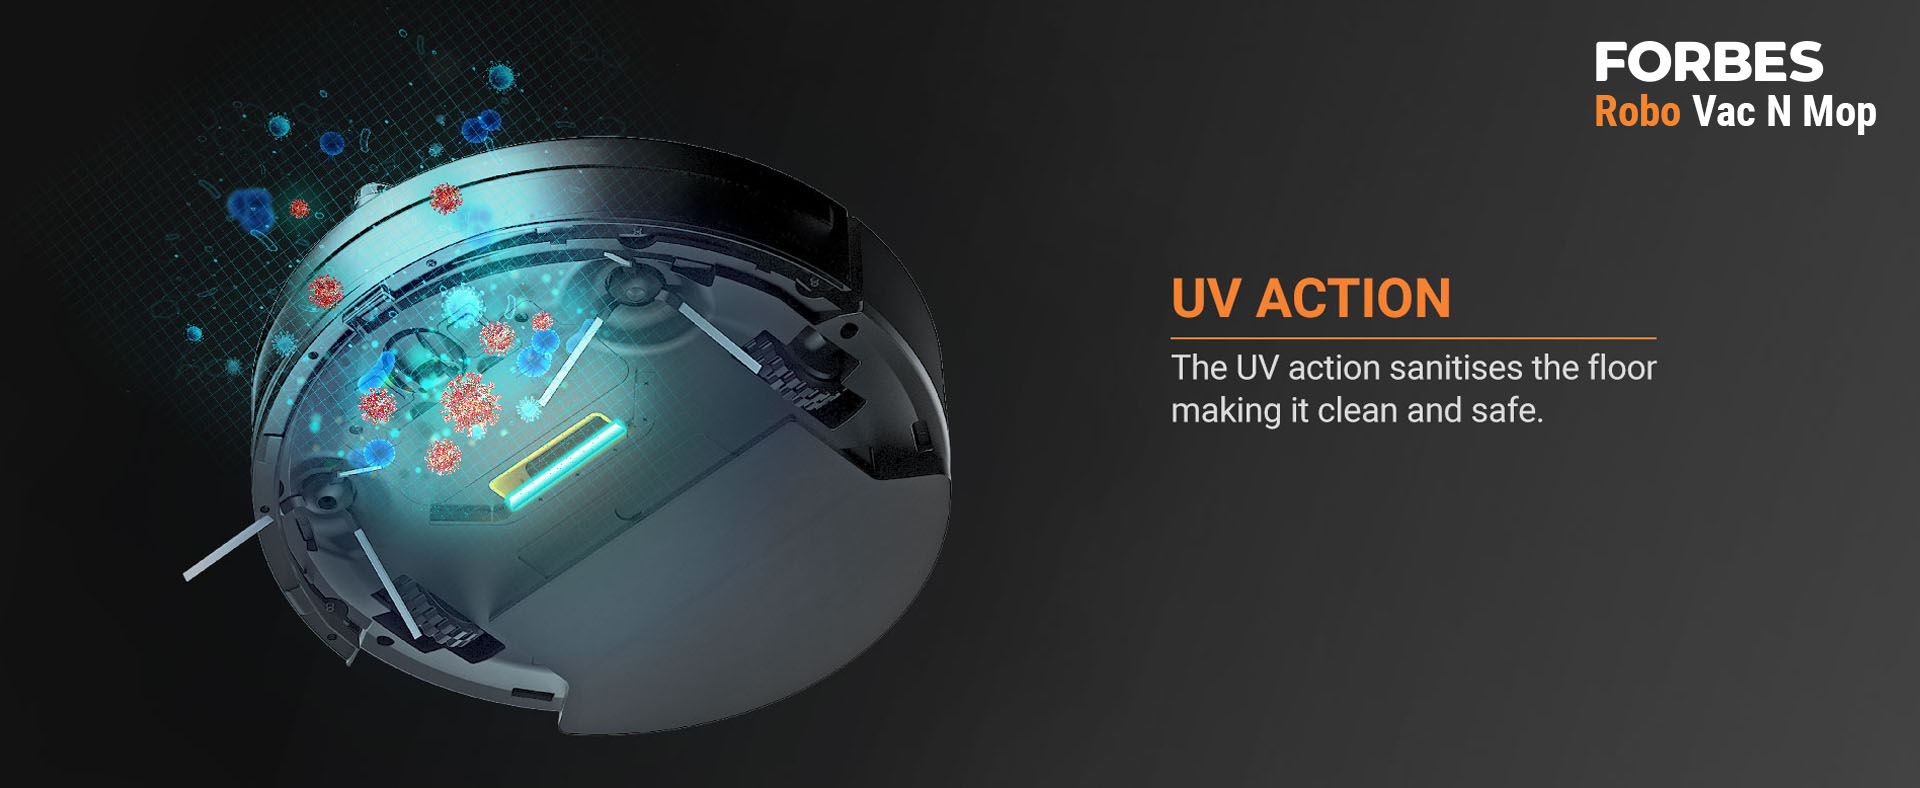 The UV action sanitises the floor making it clean and safe.